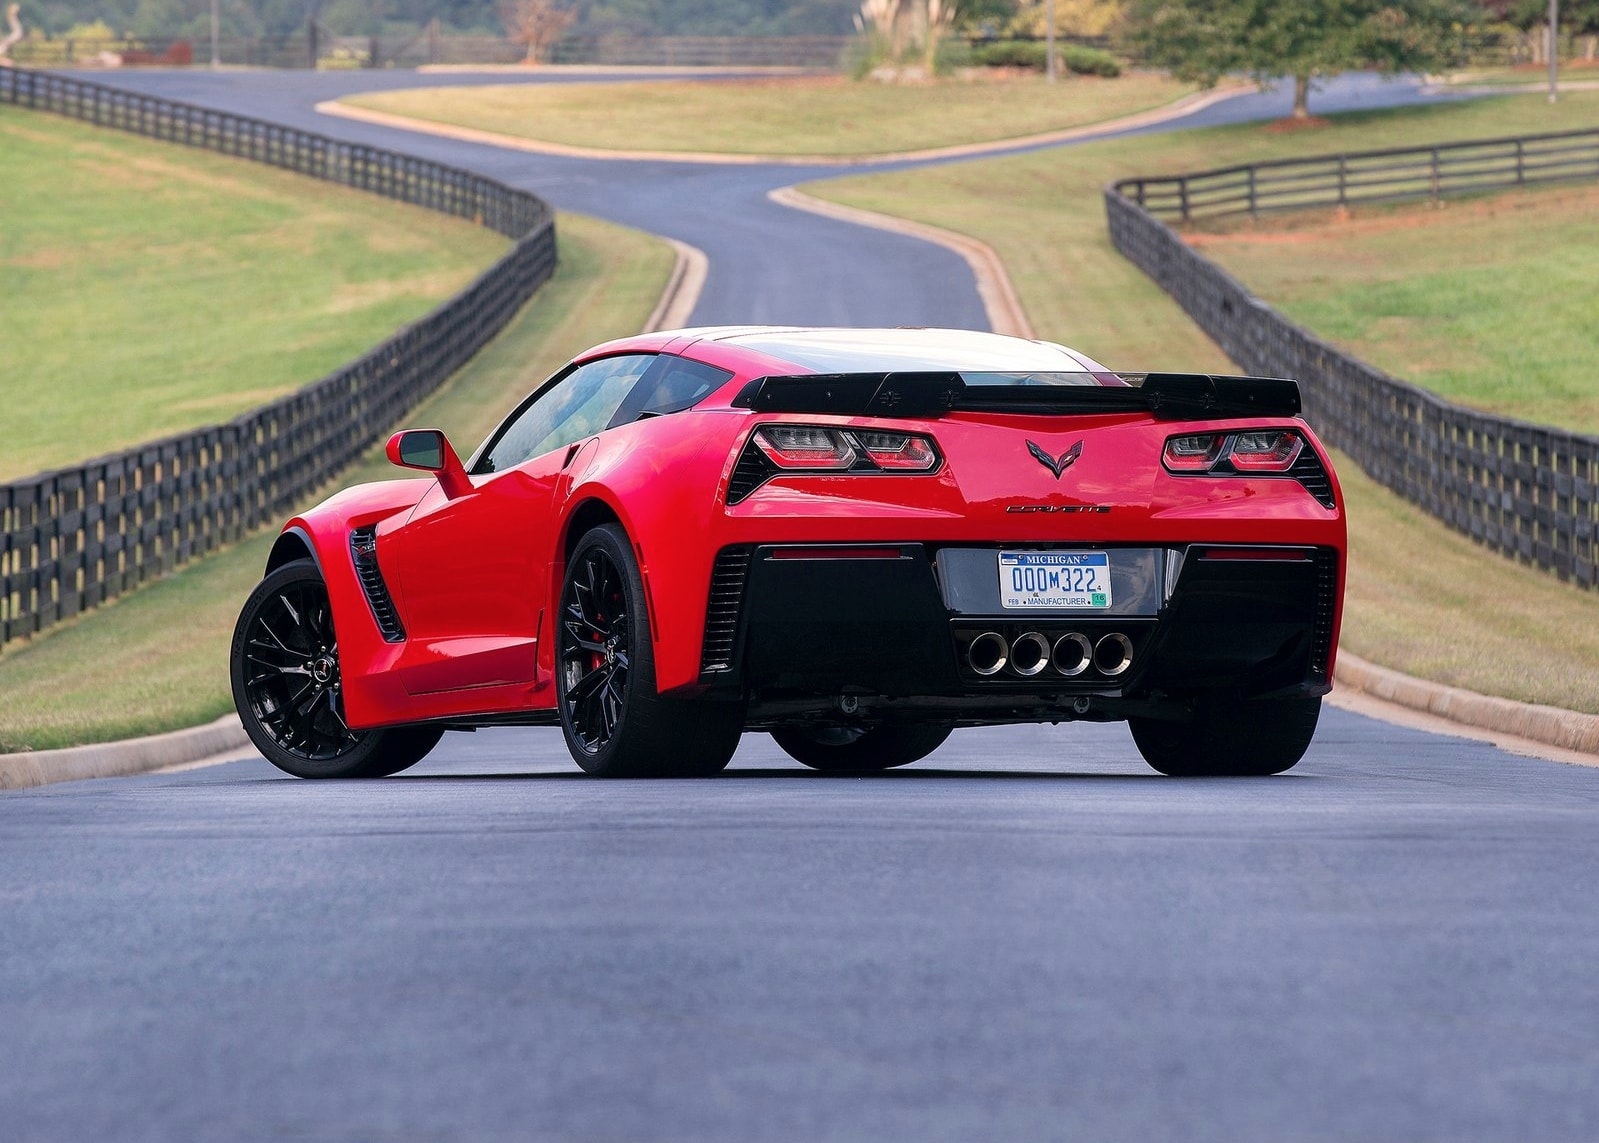 2015-corvette-z06-owners-complaining-about-heat-soak-power-loss-its-actually-a-conservative-ecu-tune-89790_1.jpg